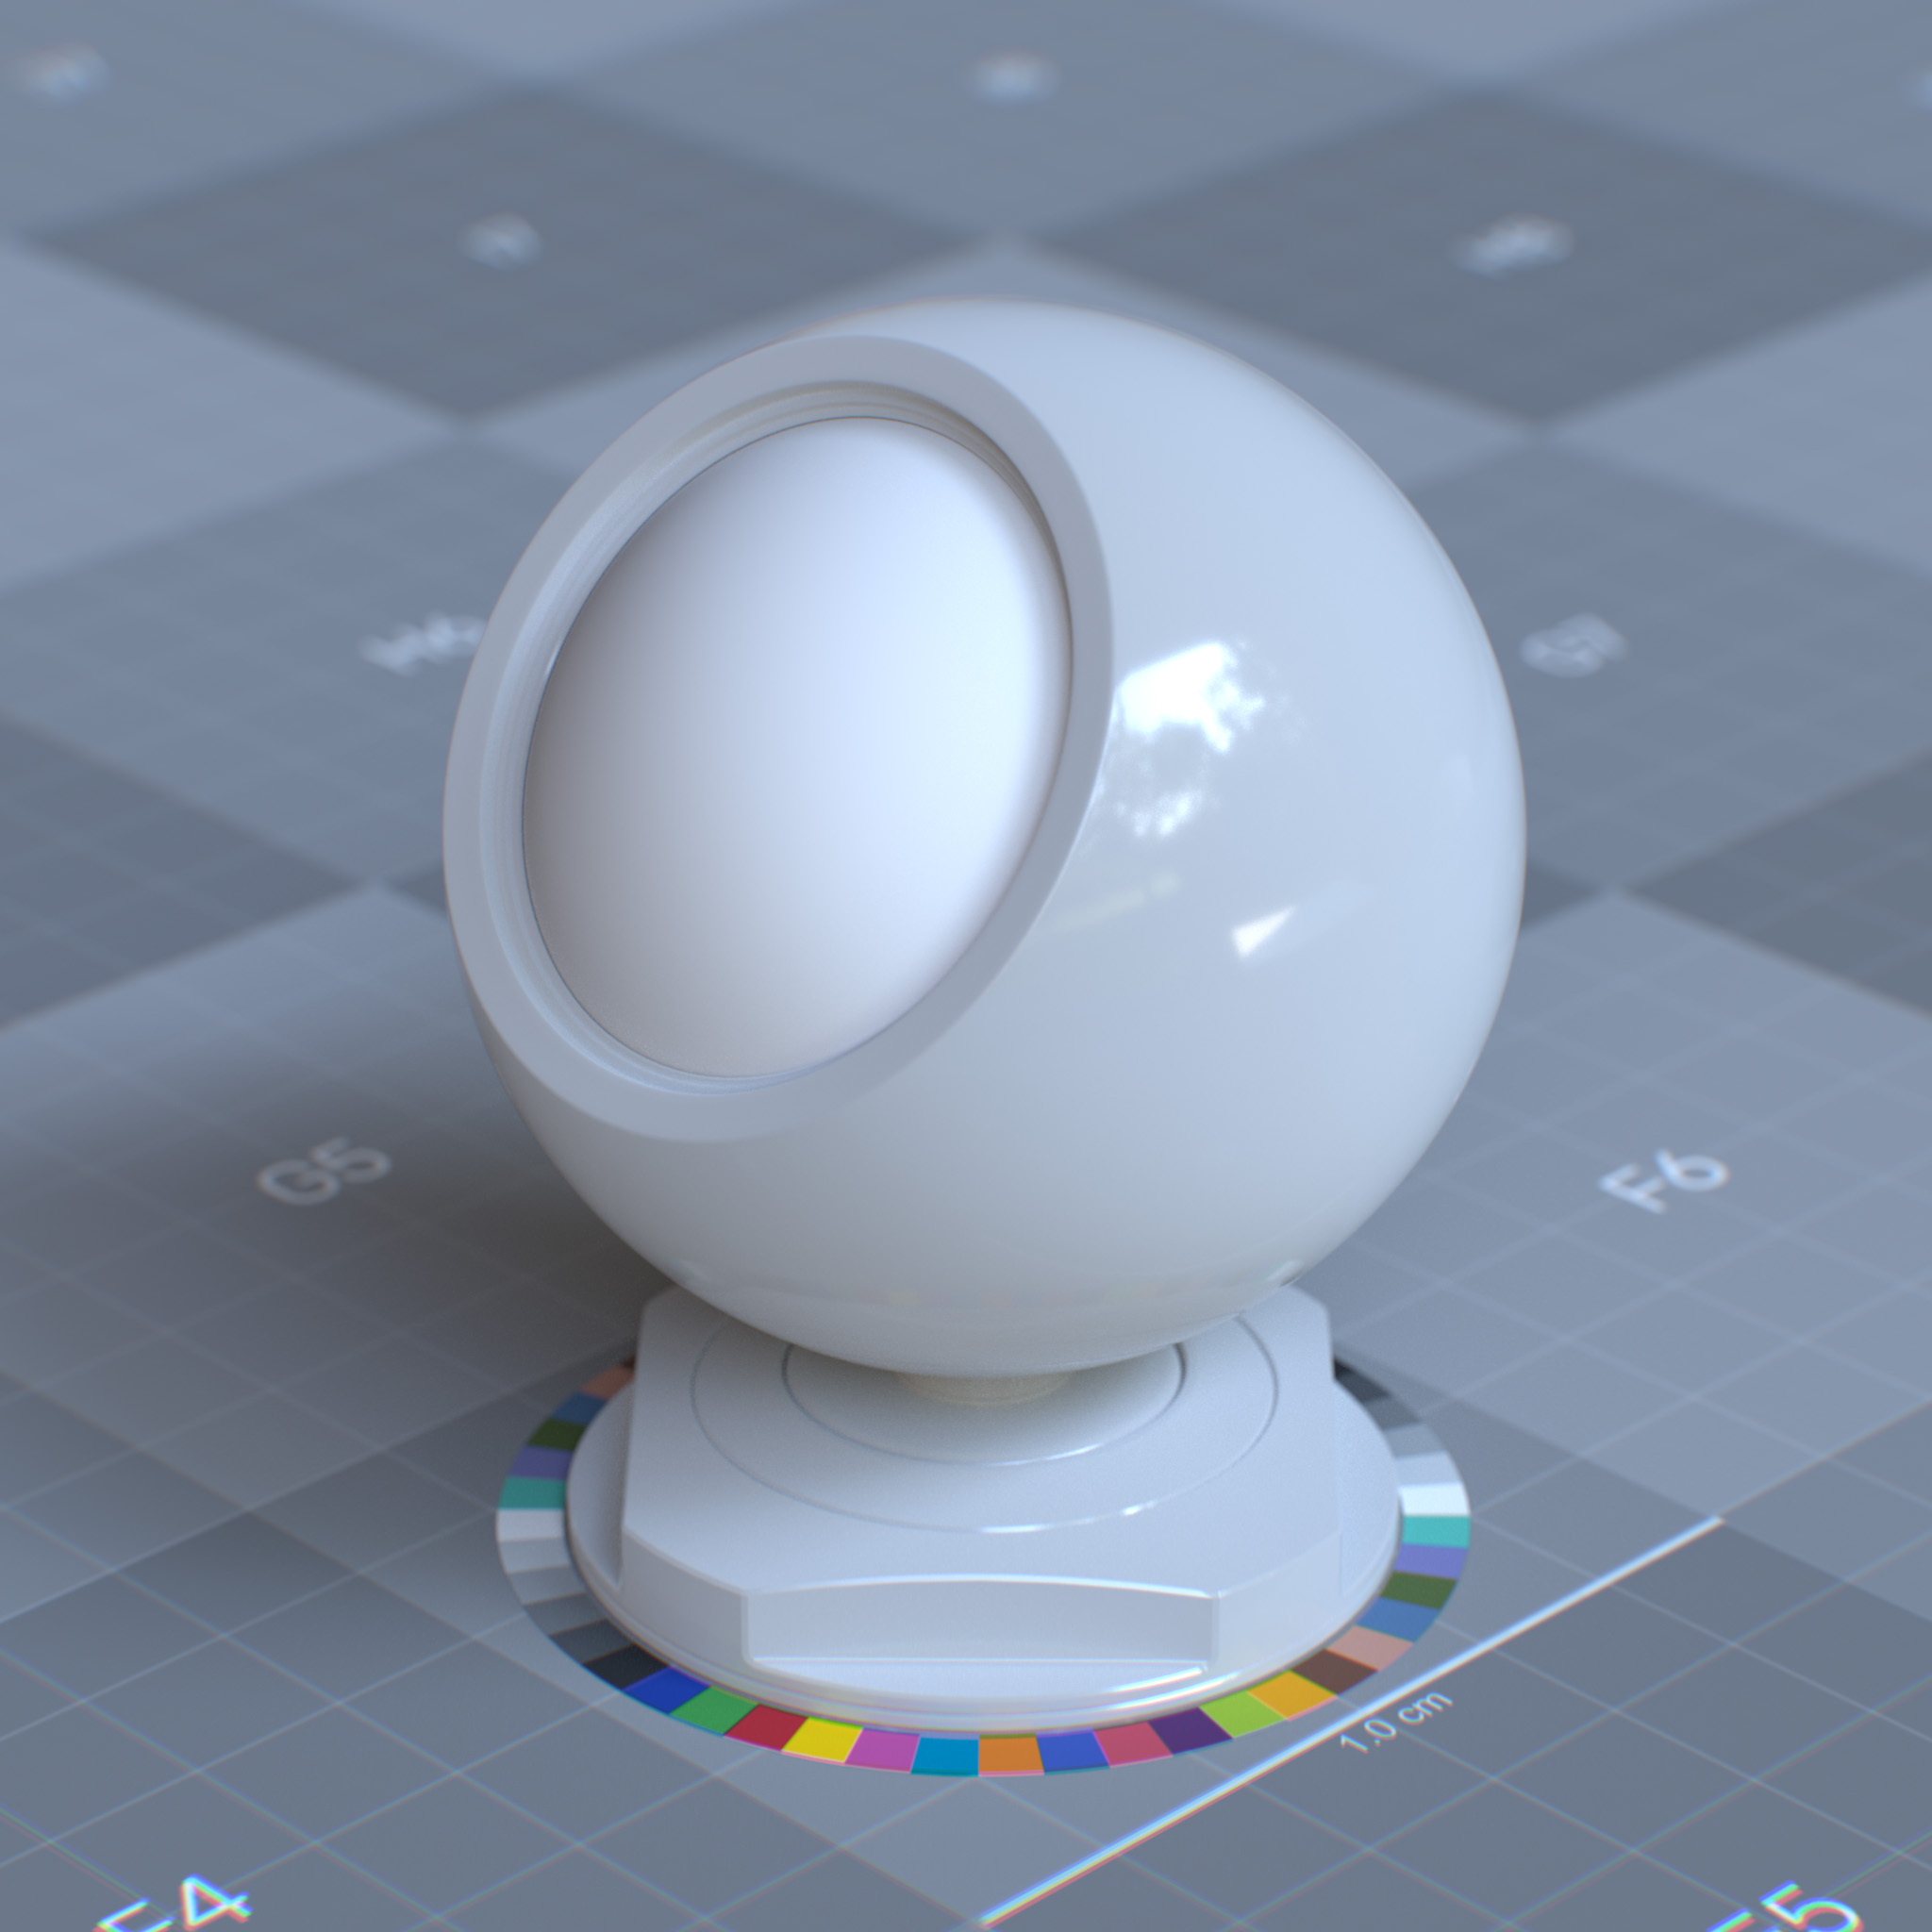 rtx_material_omnisurfacebase_specular_reflection_color_1p0_1p0_1p0